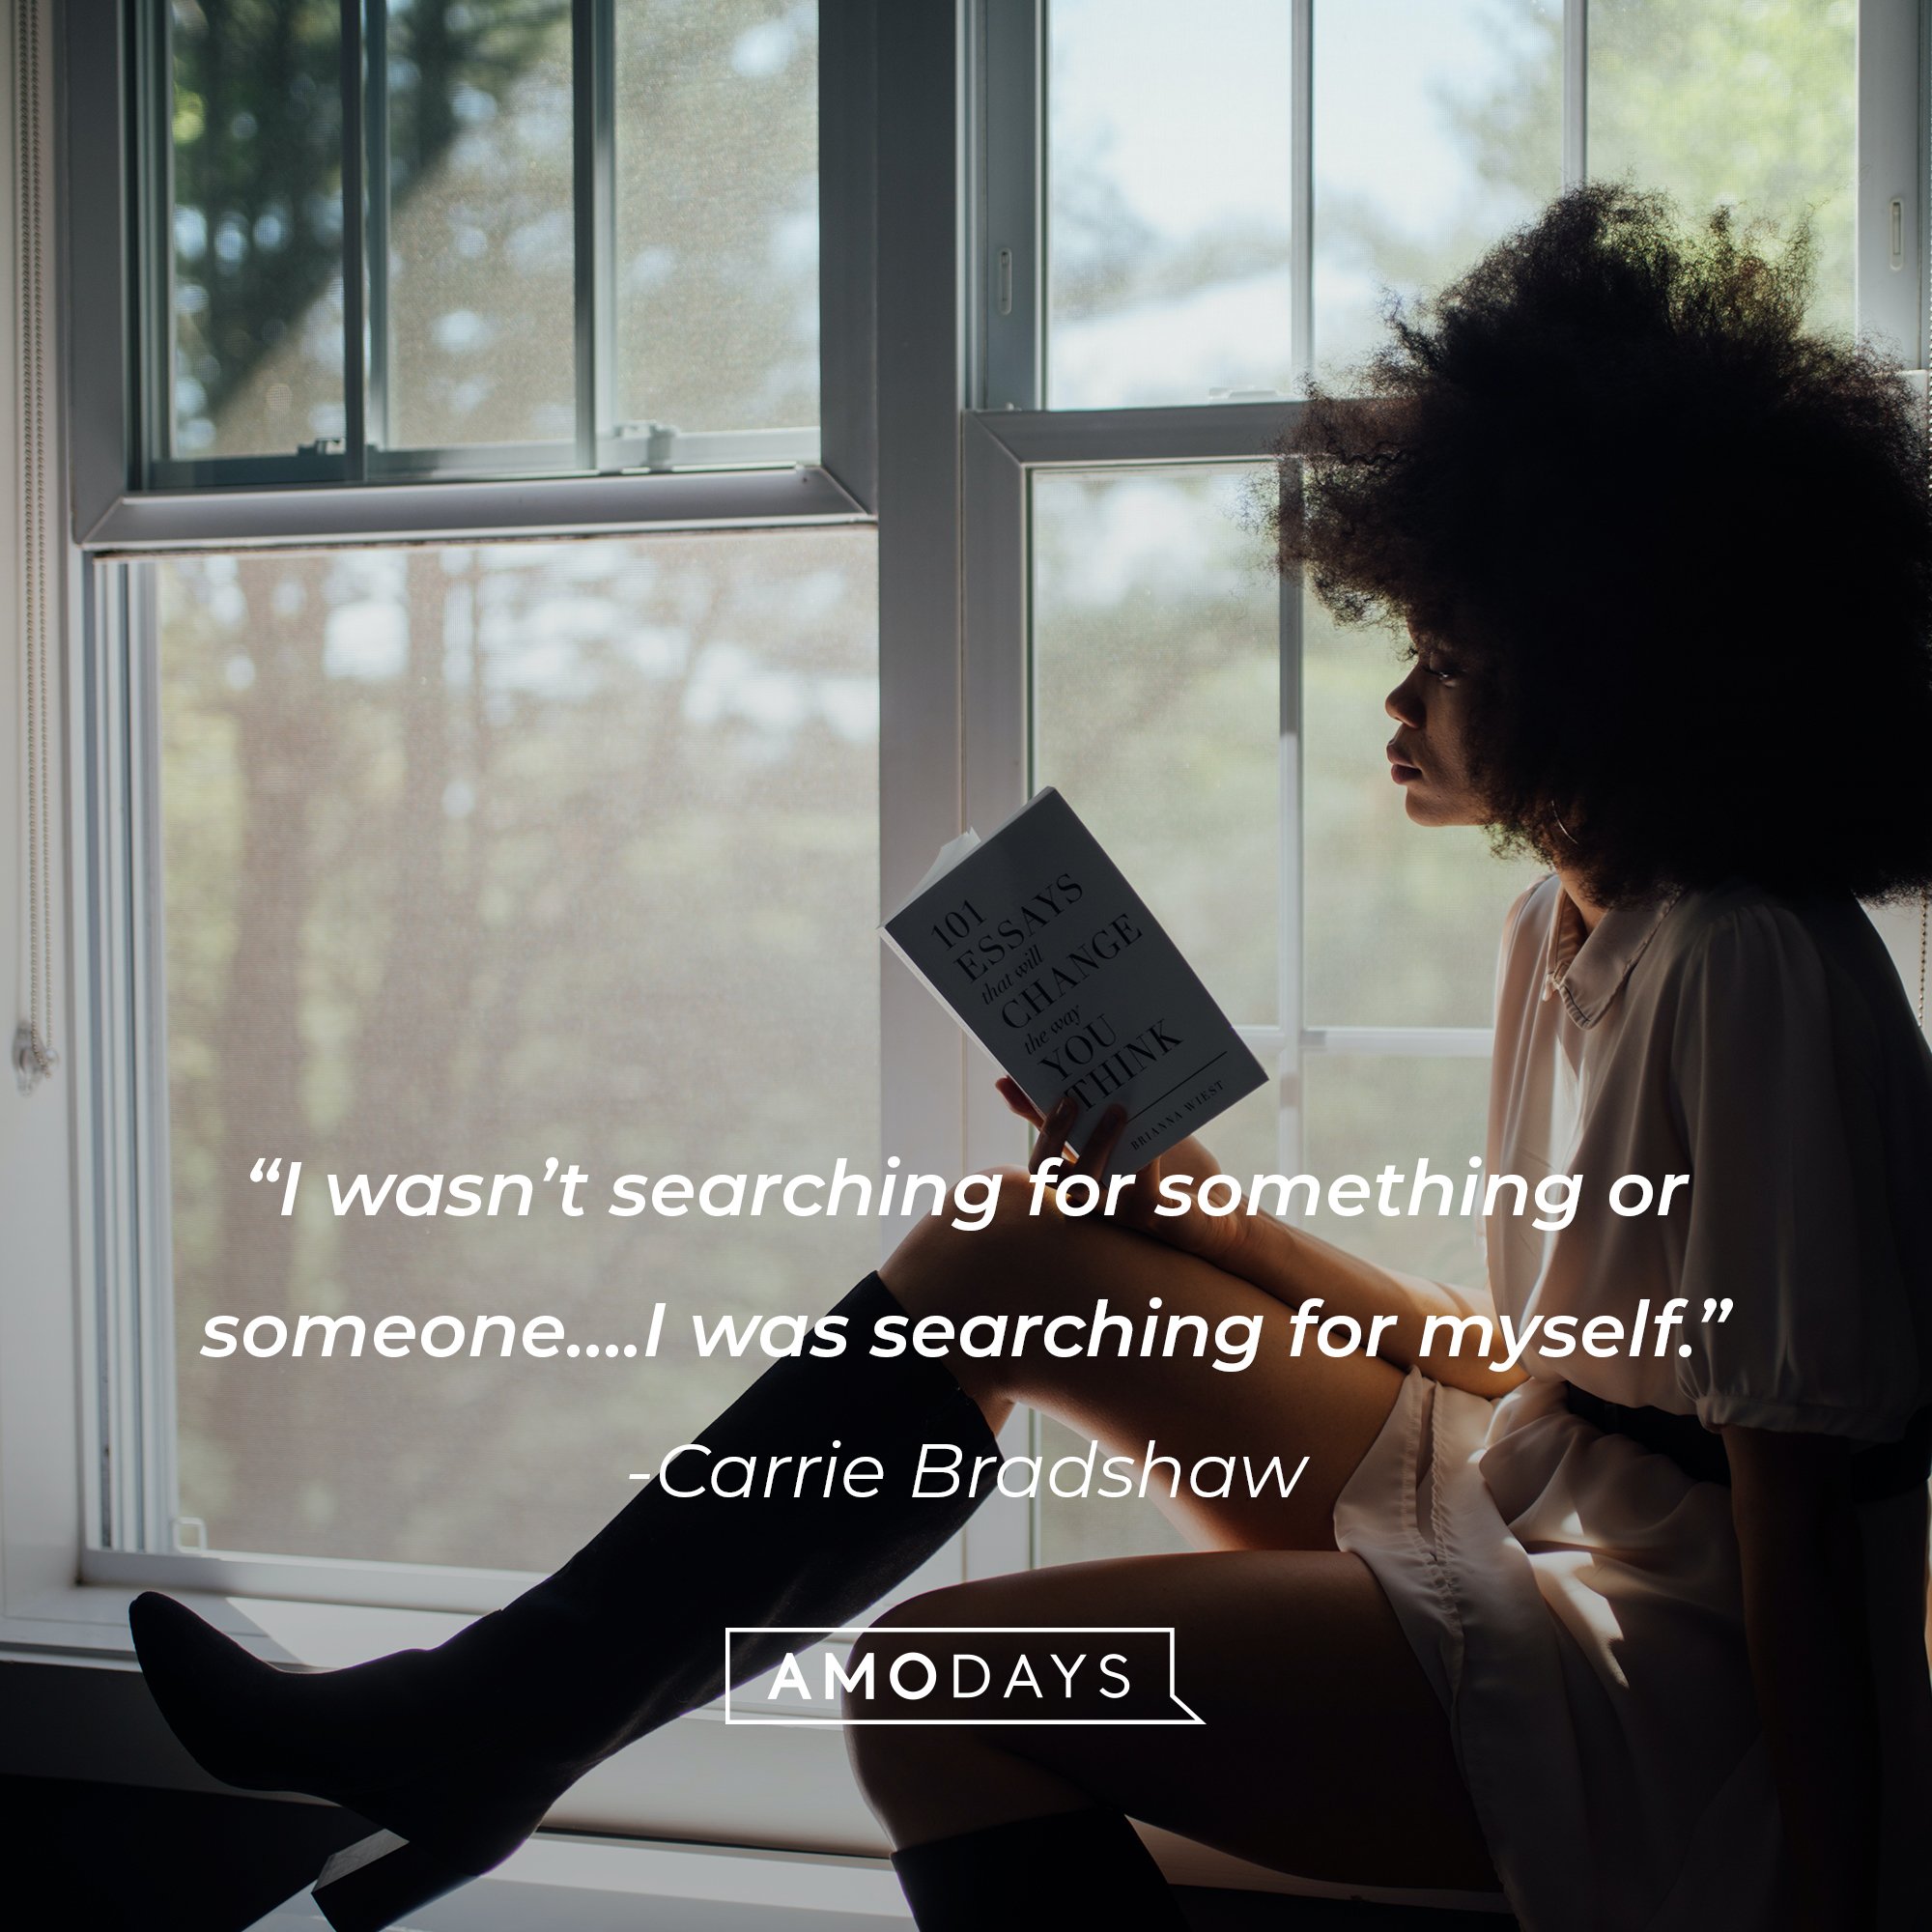  Carrie Bradshaw's quote: “I wasn’t searching for something or someone….I was searching for myself.” | Image: AmoDays